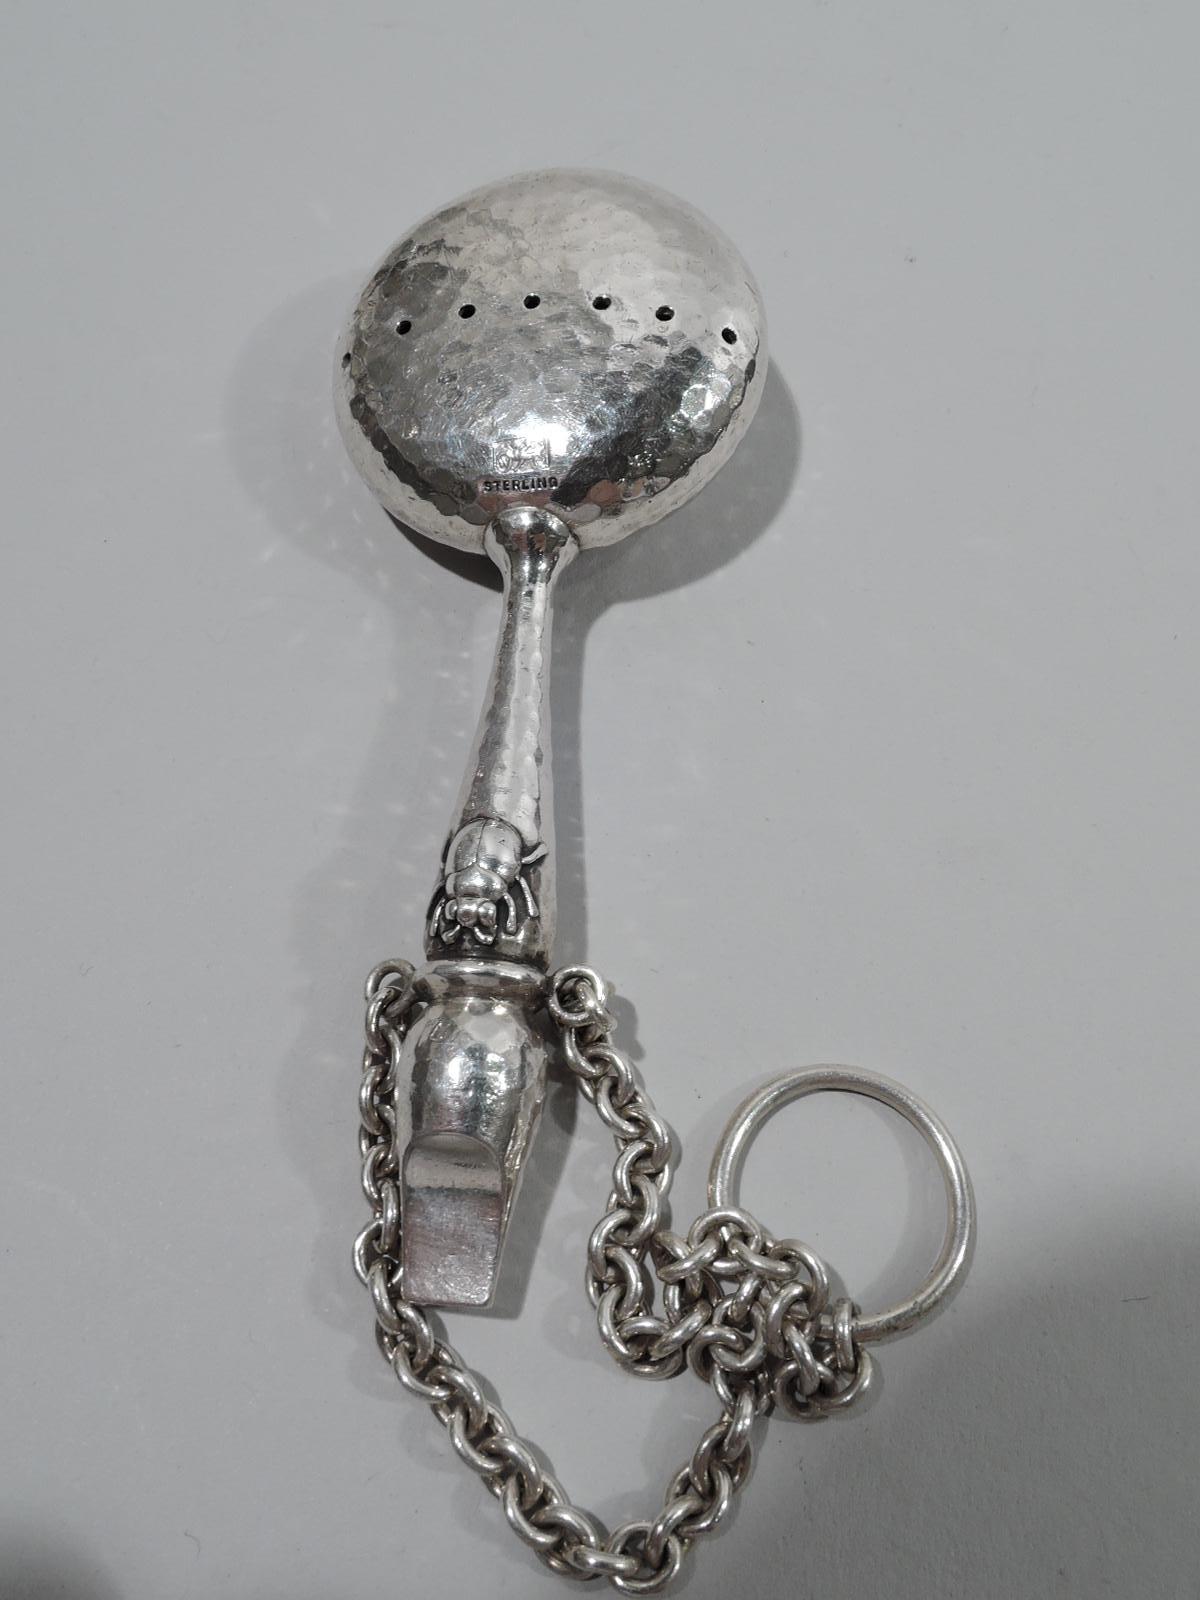 Rare Japonesque hand-hammered sterling silver baby rattle. Made by Whiting in New York, ca 1885. Flat and round head with double sided piercing with applied flower head and beetle on front. Baluster handle with second beetle and whistle terminal.